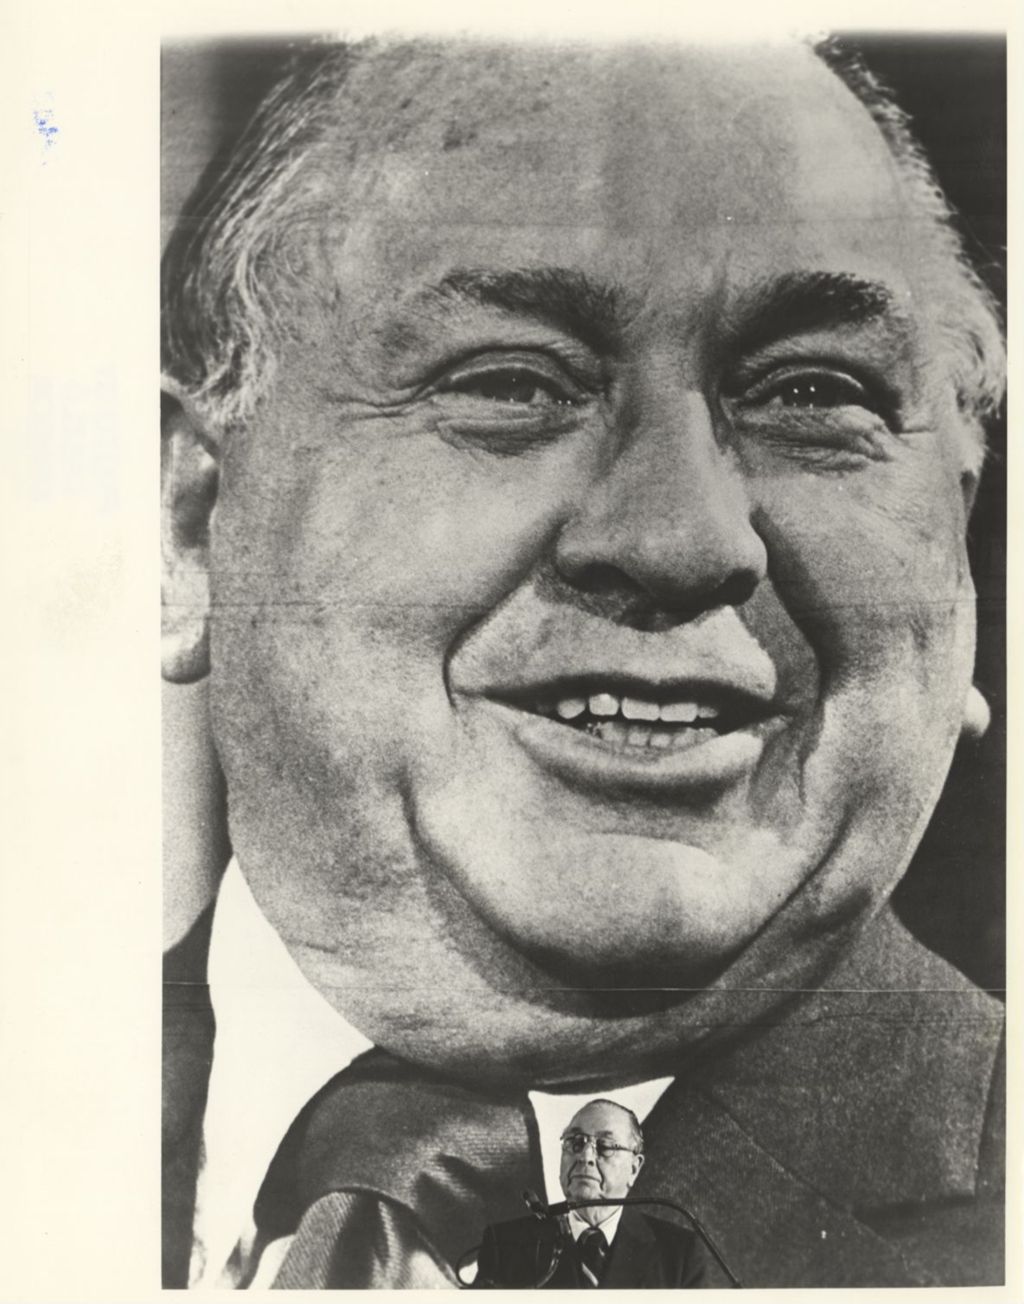 Miniature of Richard J. Daley in front of his portrait